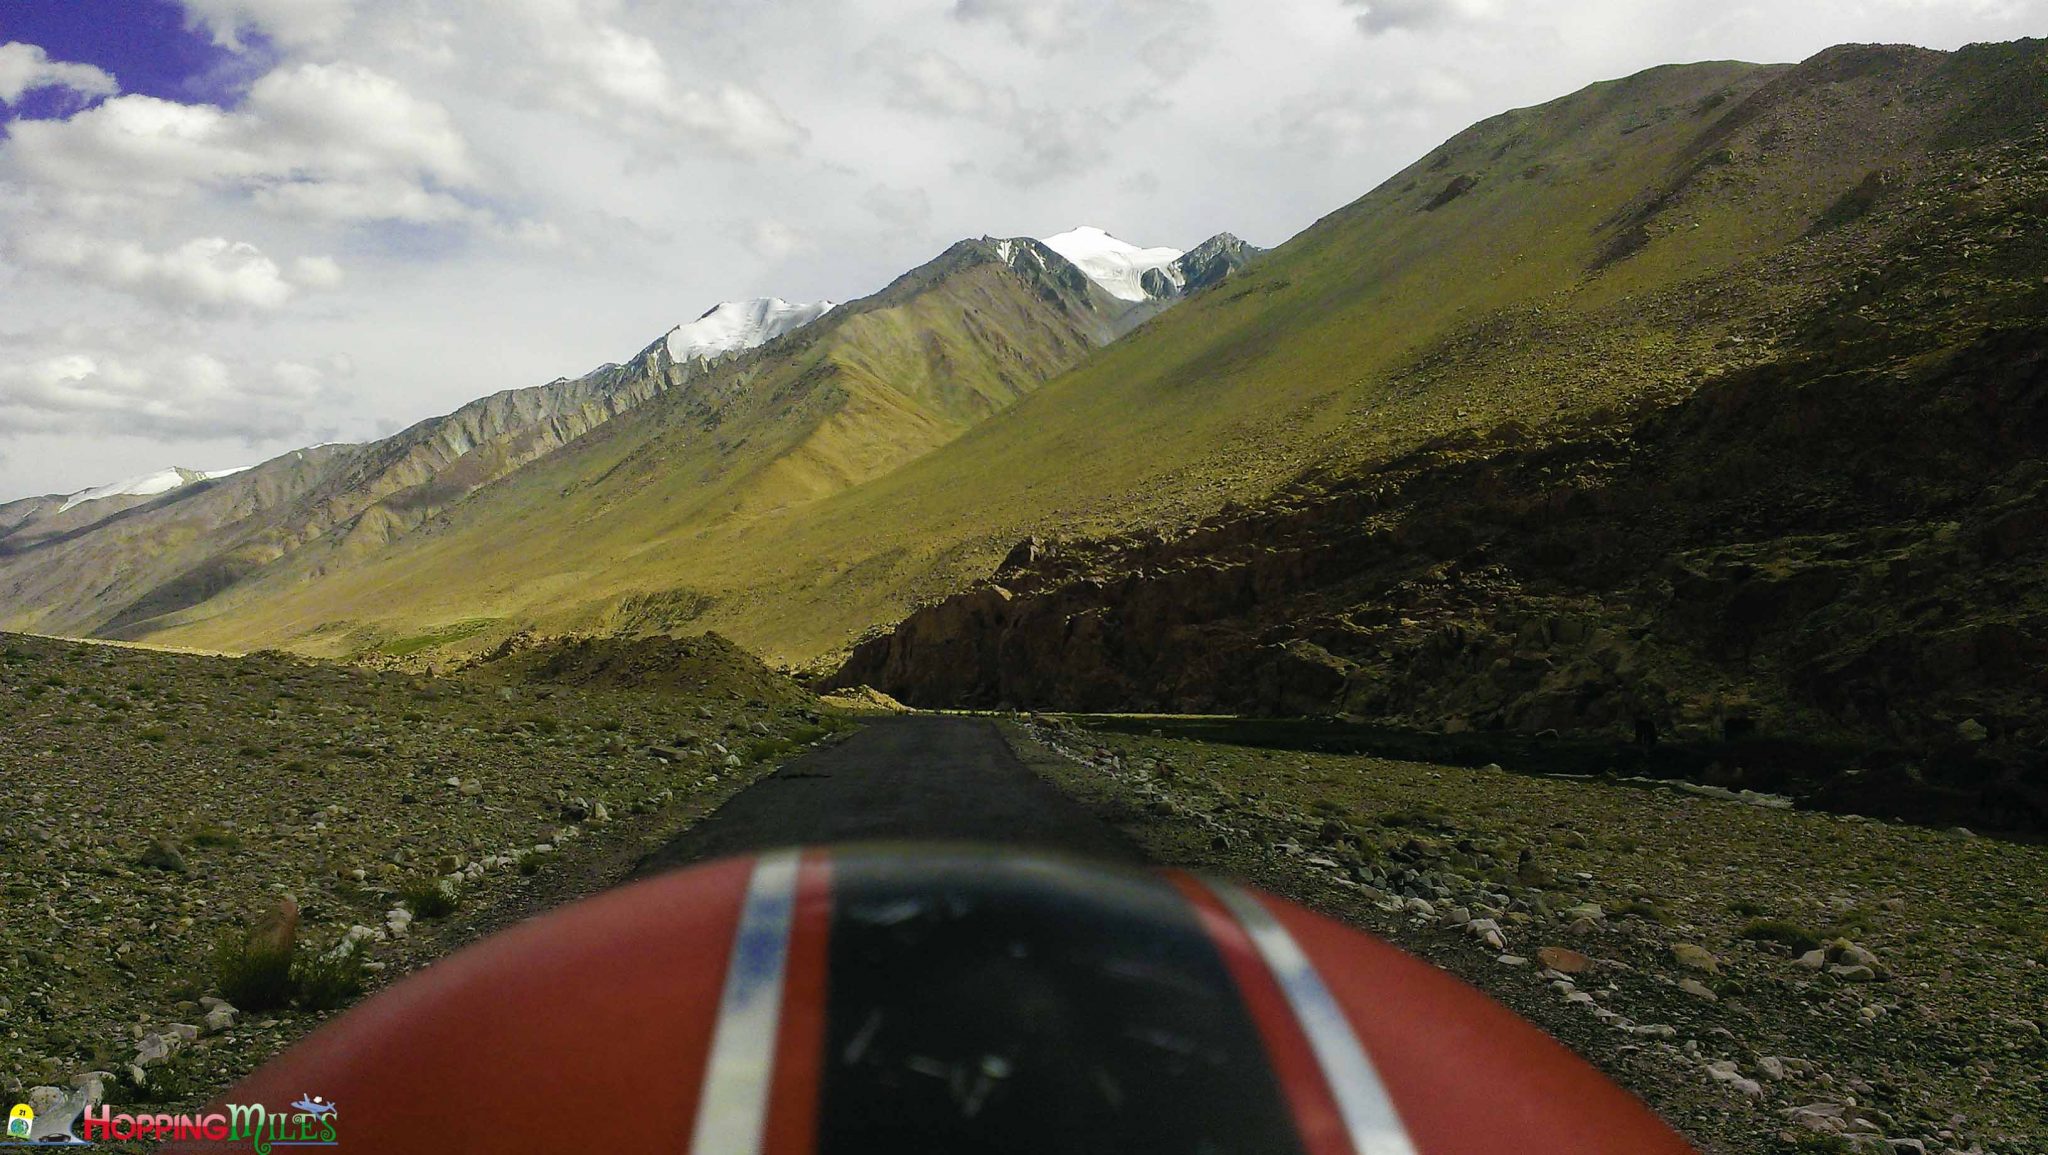 Bangalore to Ladakh Road Trip in a Fiat Punto - In 99 pictures